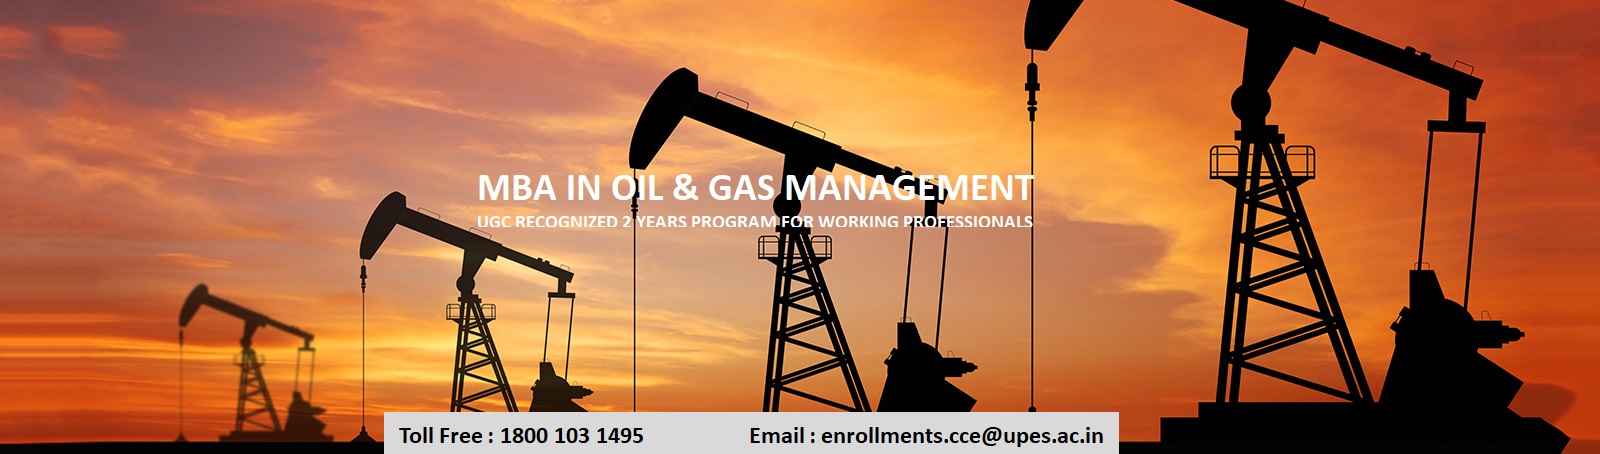 MBA oil and gas